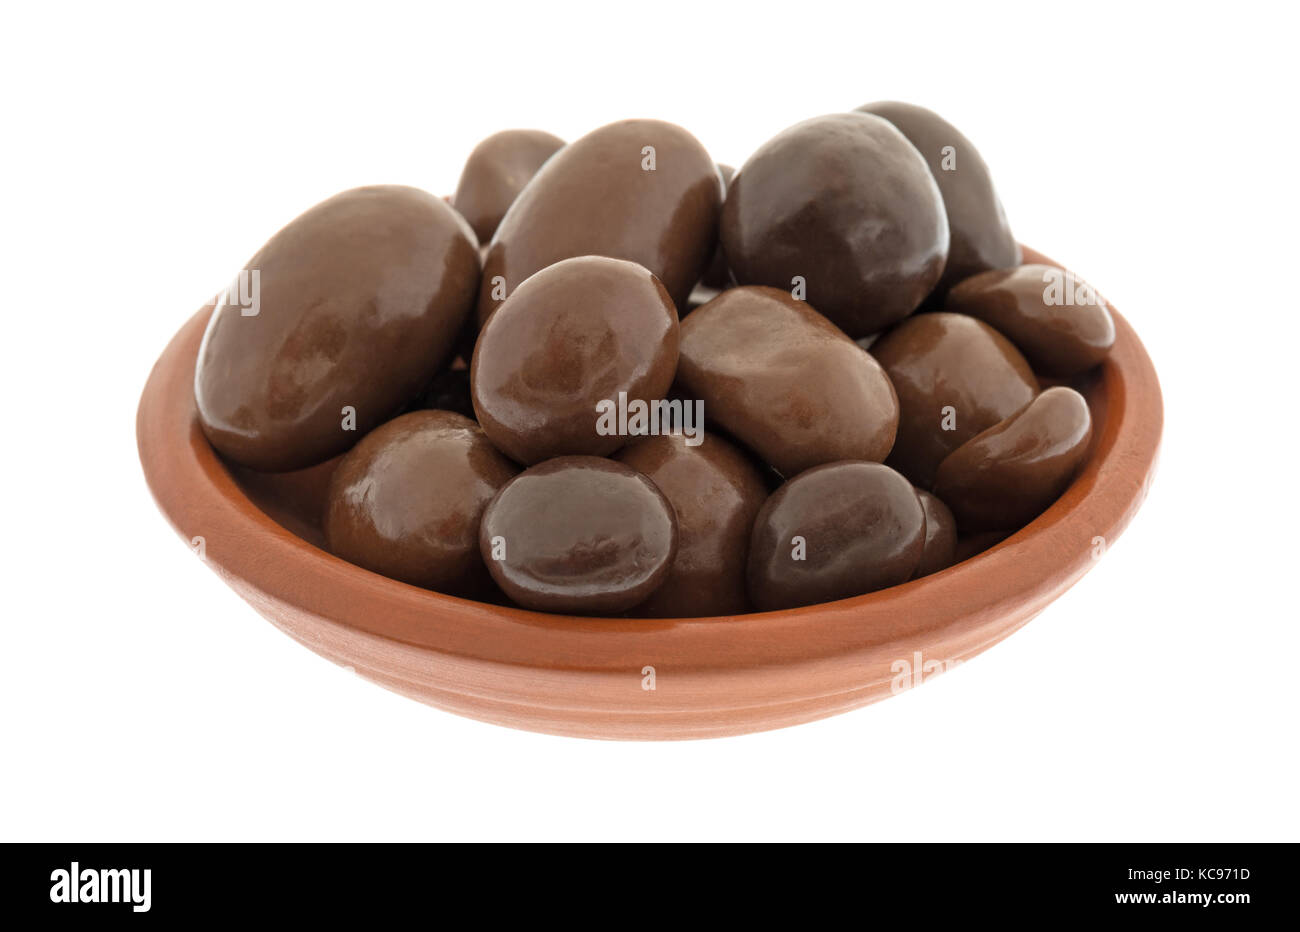 A small bowl filled with bridge mix chocolate candy isolated on a white background. Stock Photo